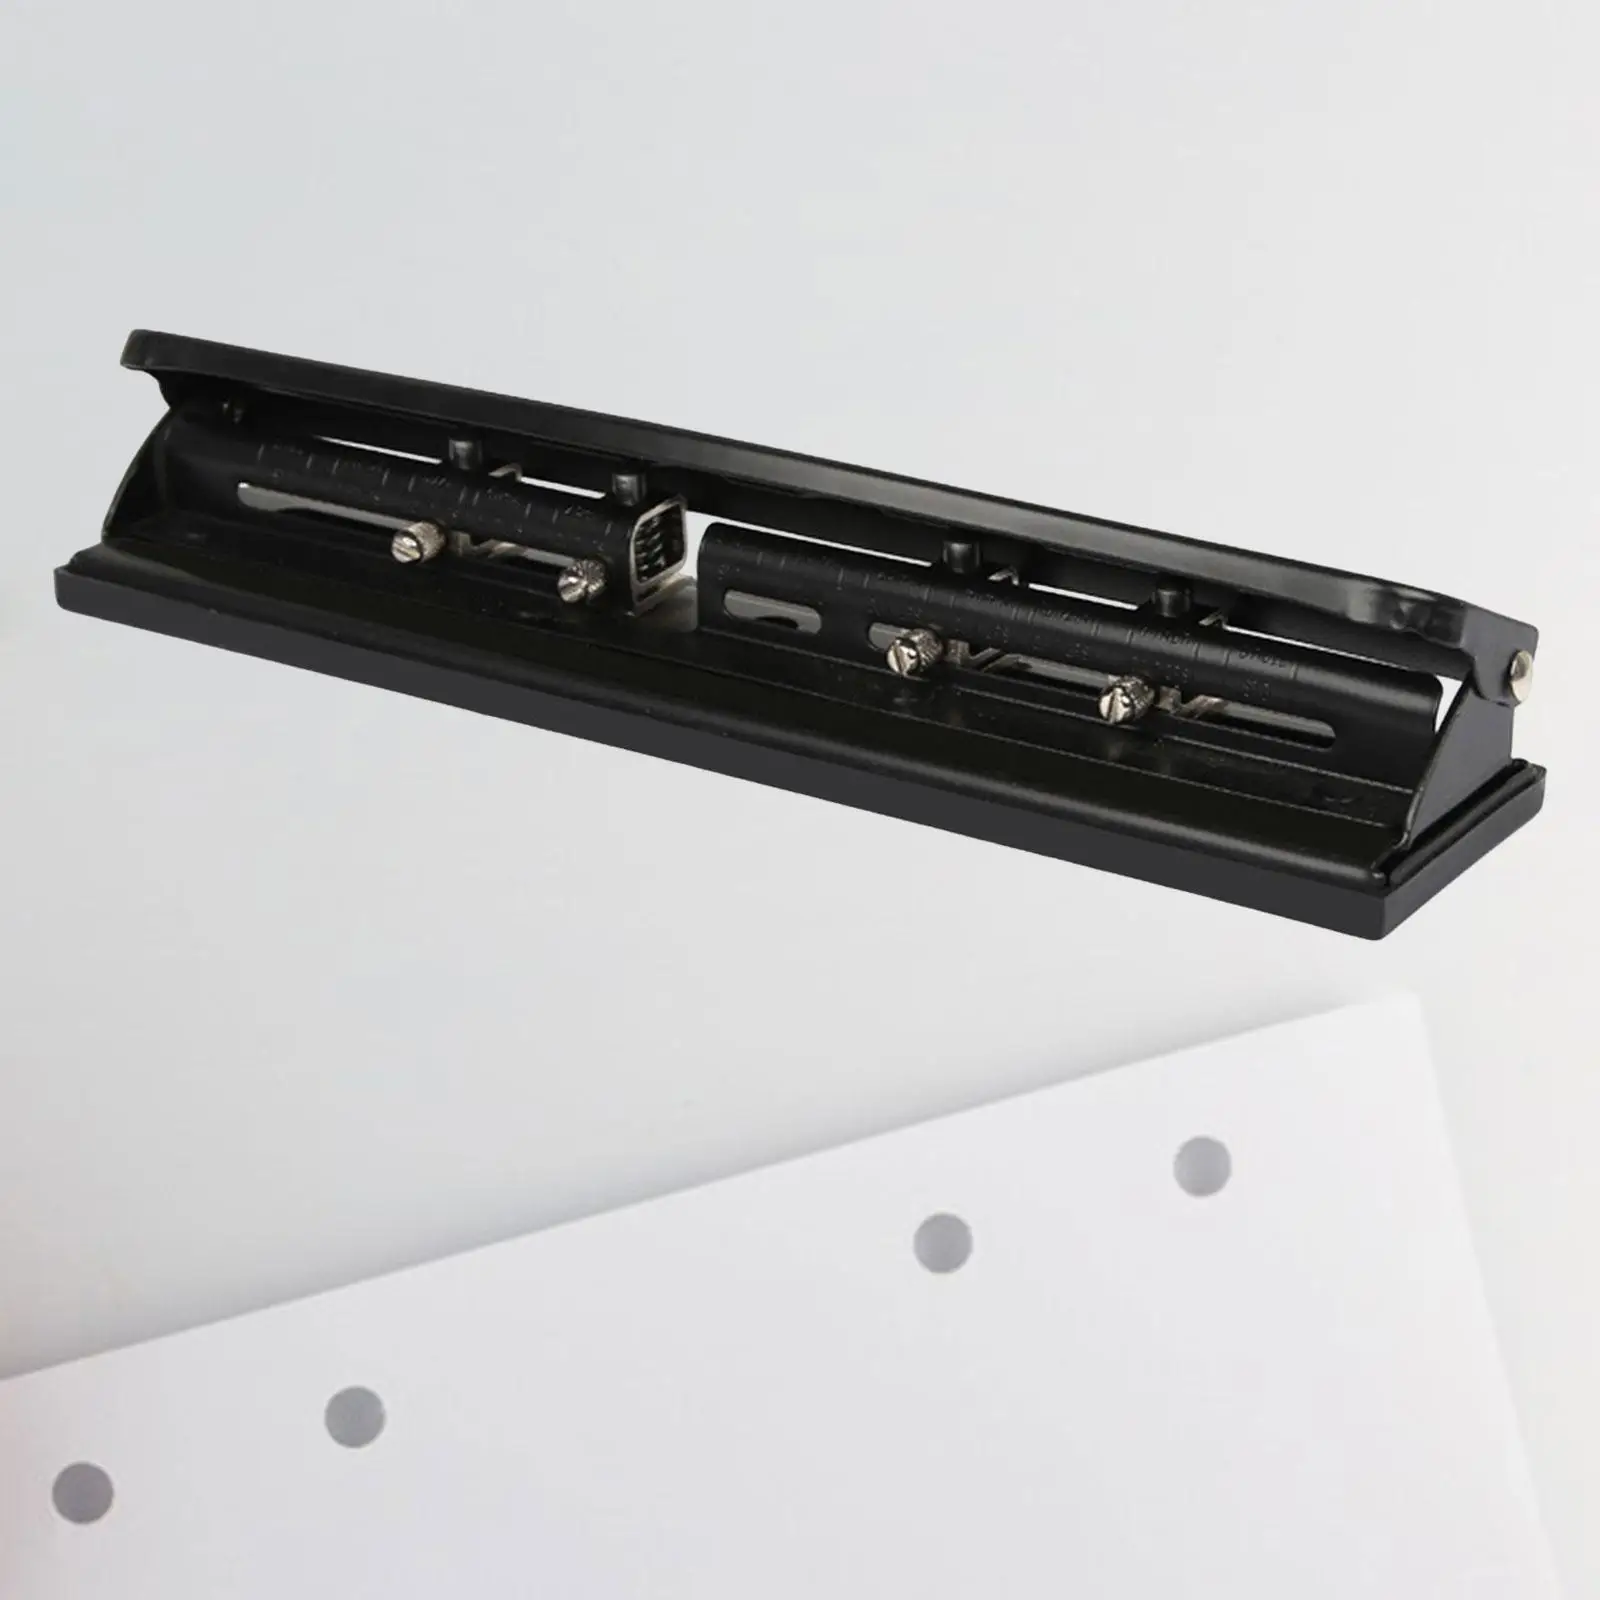 4 Hole Punch Manual Desktop Heavy Duty Precision Portable File Binding Metal Adjustable for Learning Classroom Craft